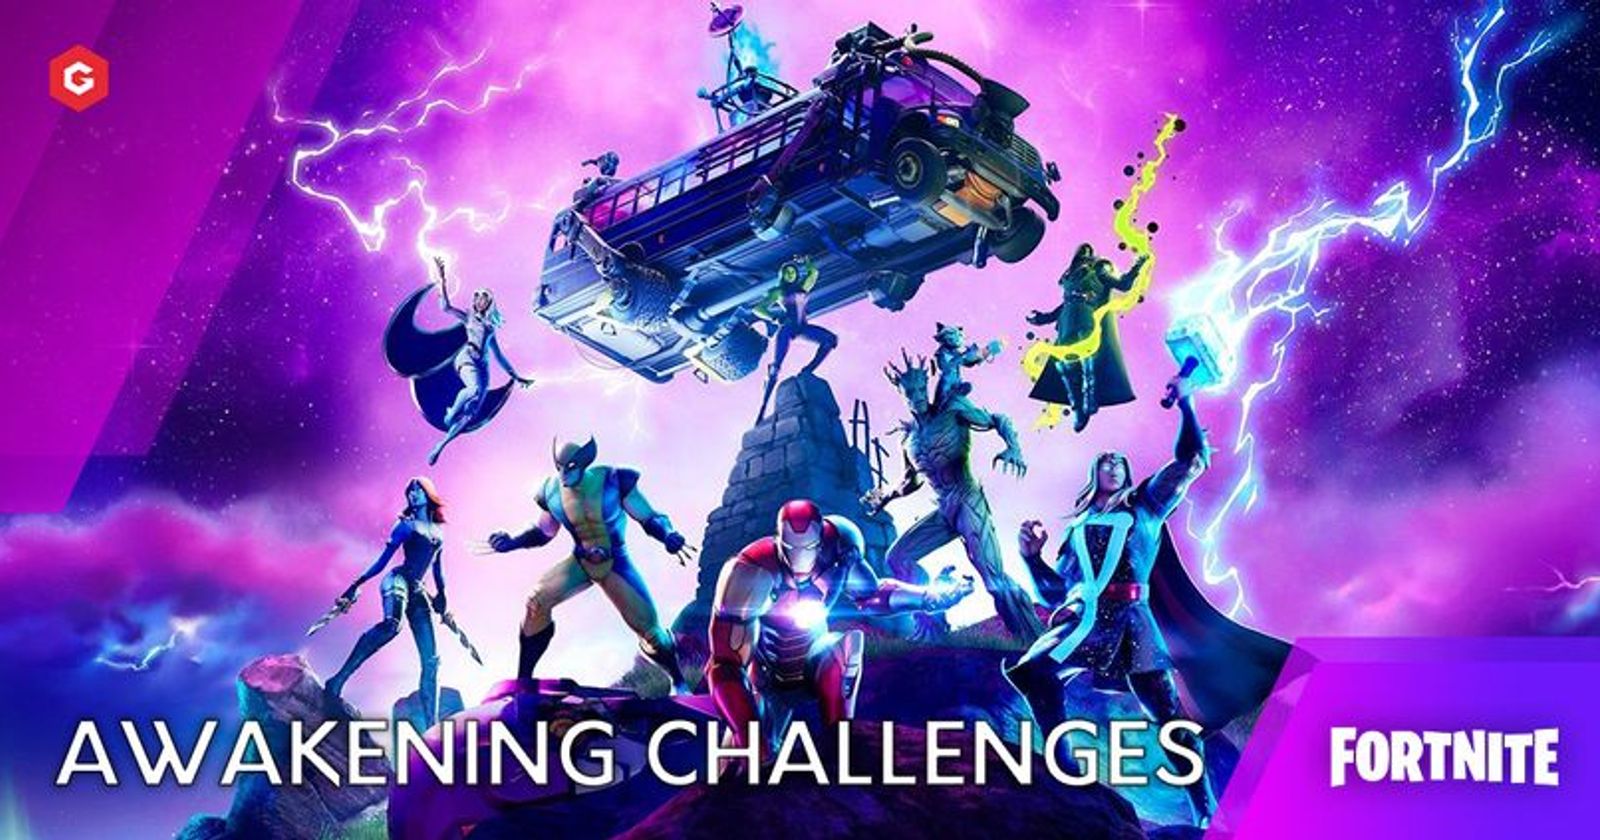 How to complete the Storm Awakening Challenges in Fortnite